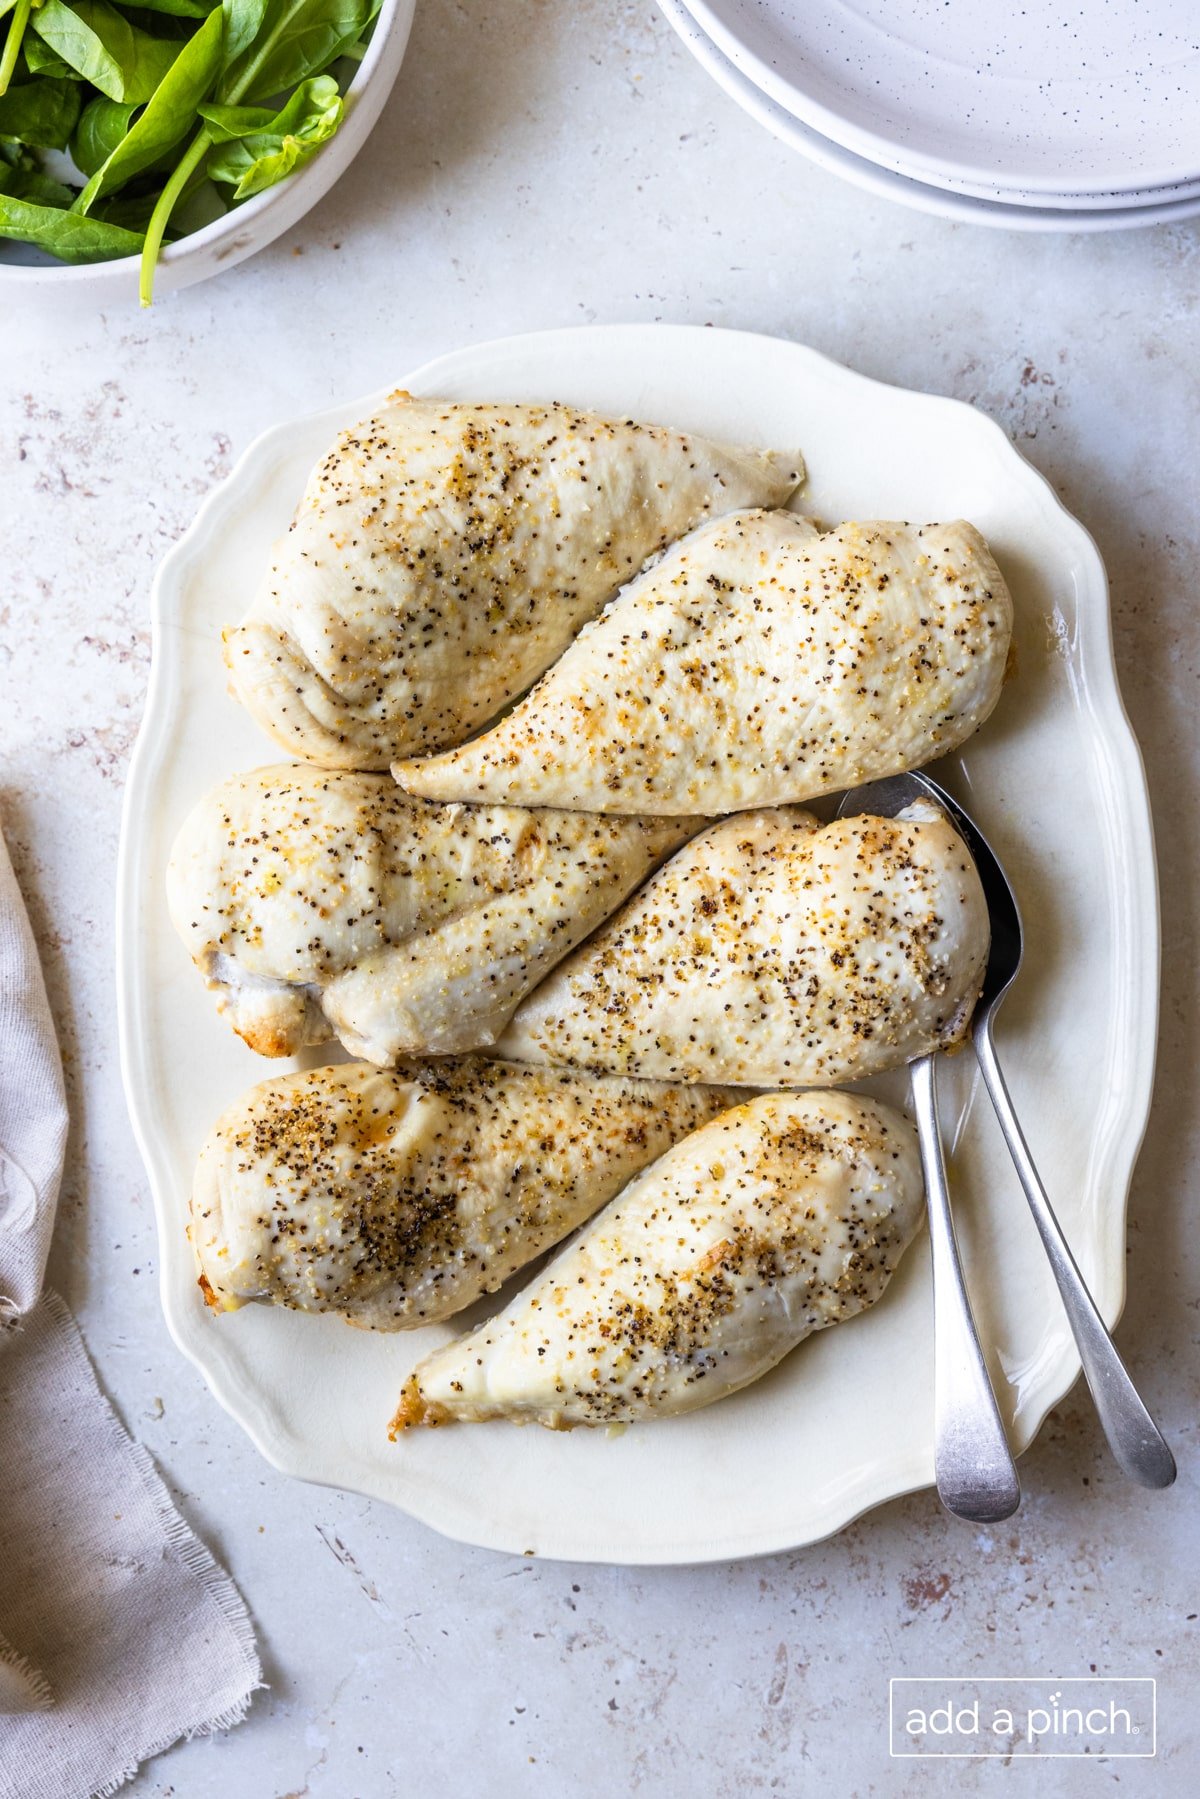 Photo of seasoned baked chicken breasts on a white platter.